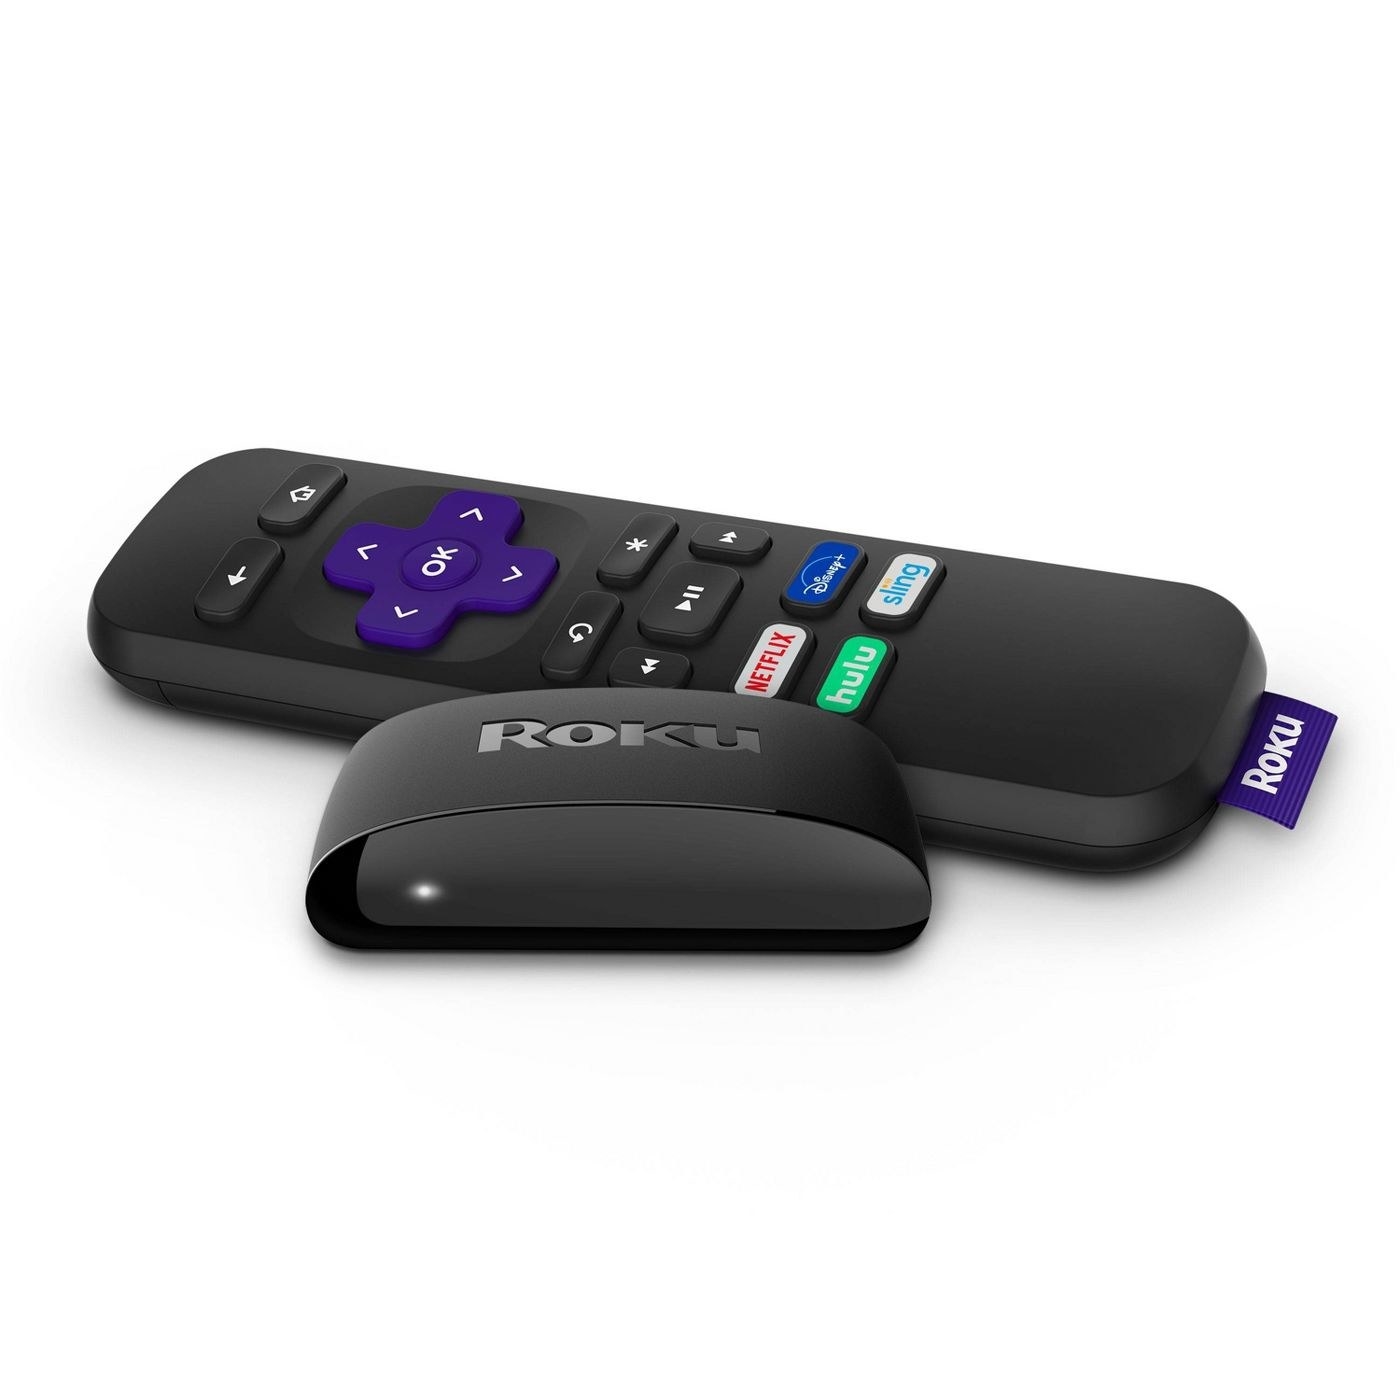 the roku and its coordinating remote